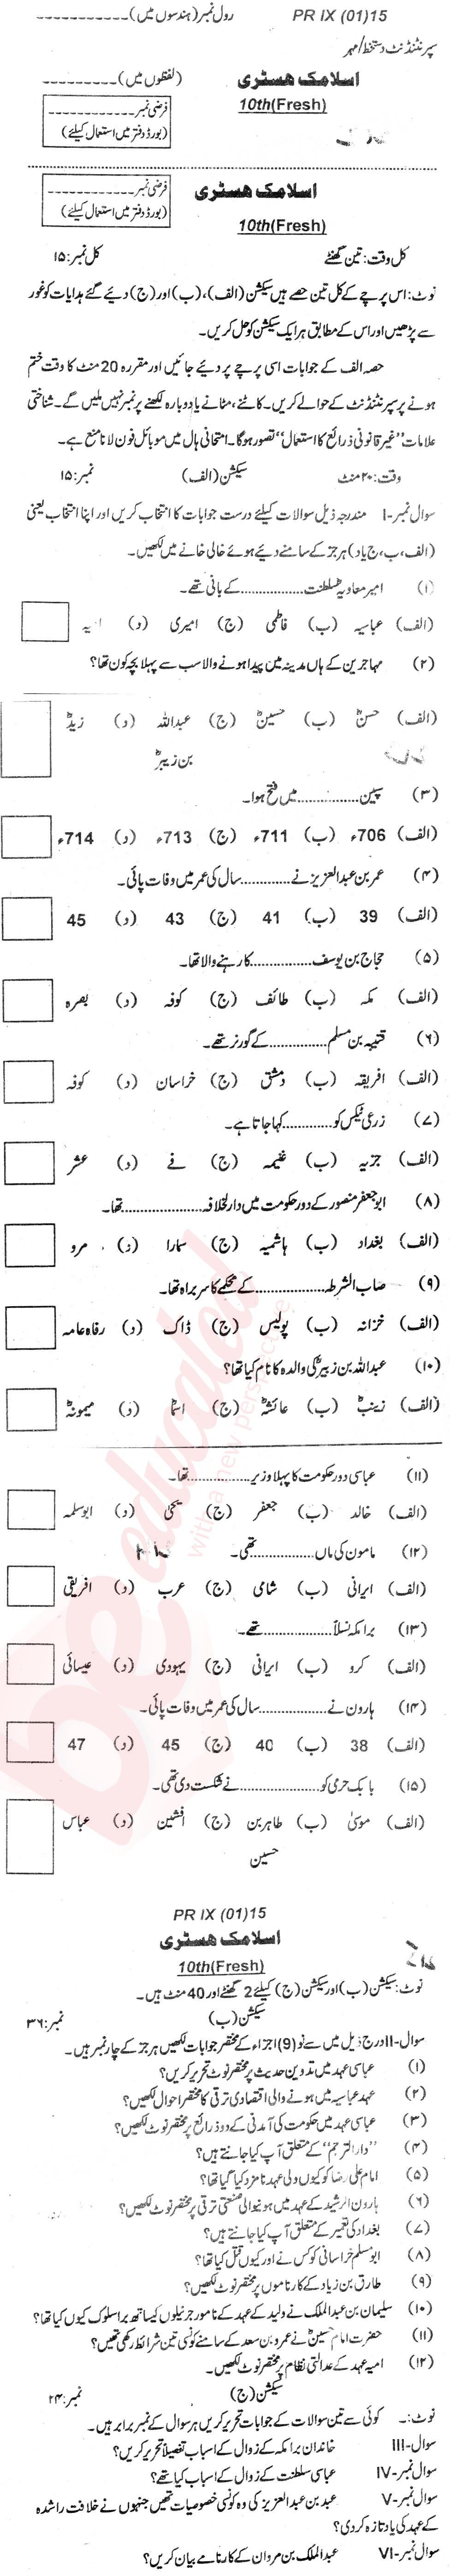 Health and Physical Education 10th Urdu Medium Past Paper Group 1 BISE Bannu 2015